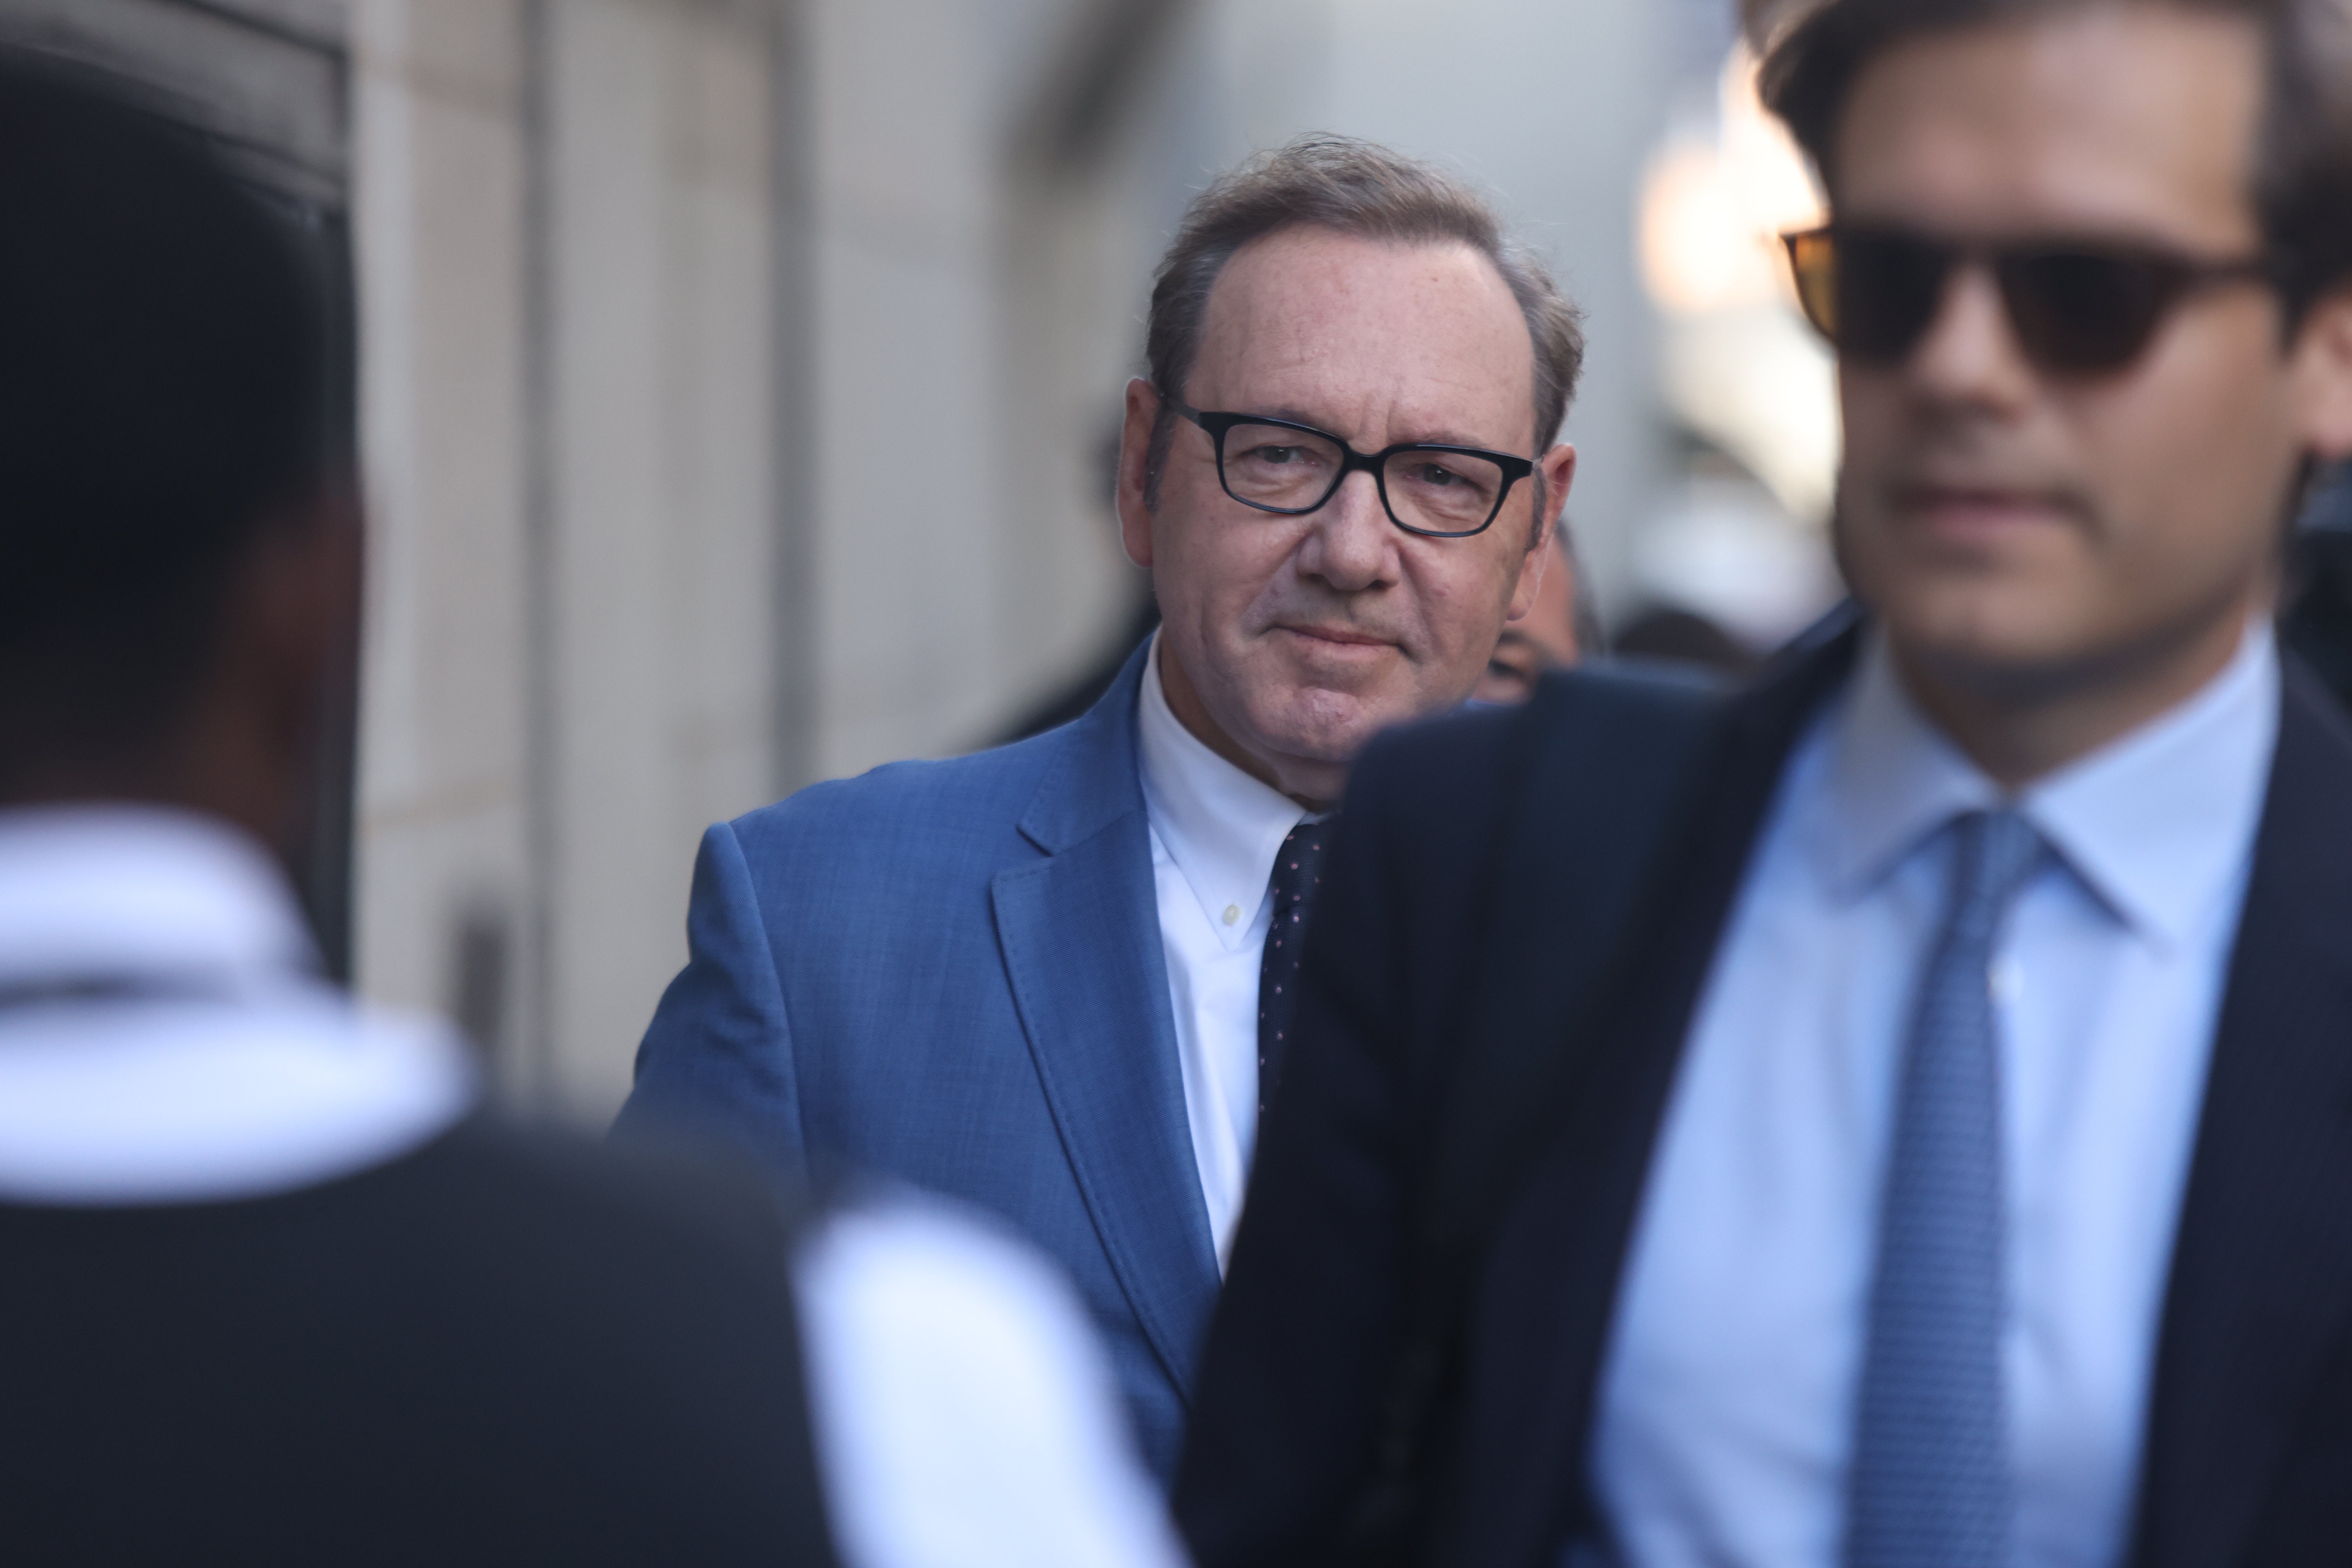 Actor Kevin Spacey arrives at the Old Bailey in London (James Manning/PA)